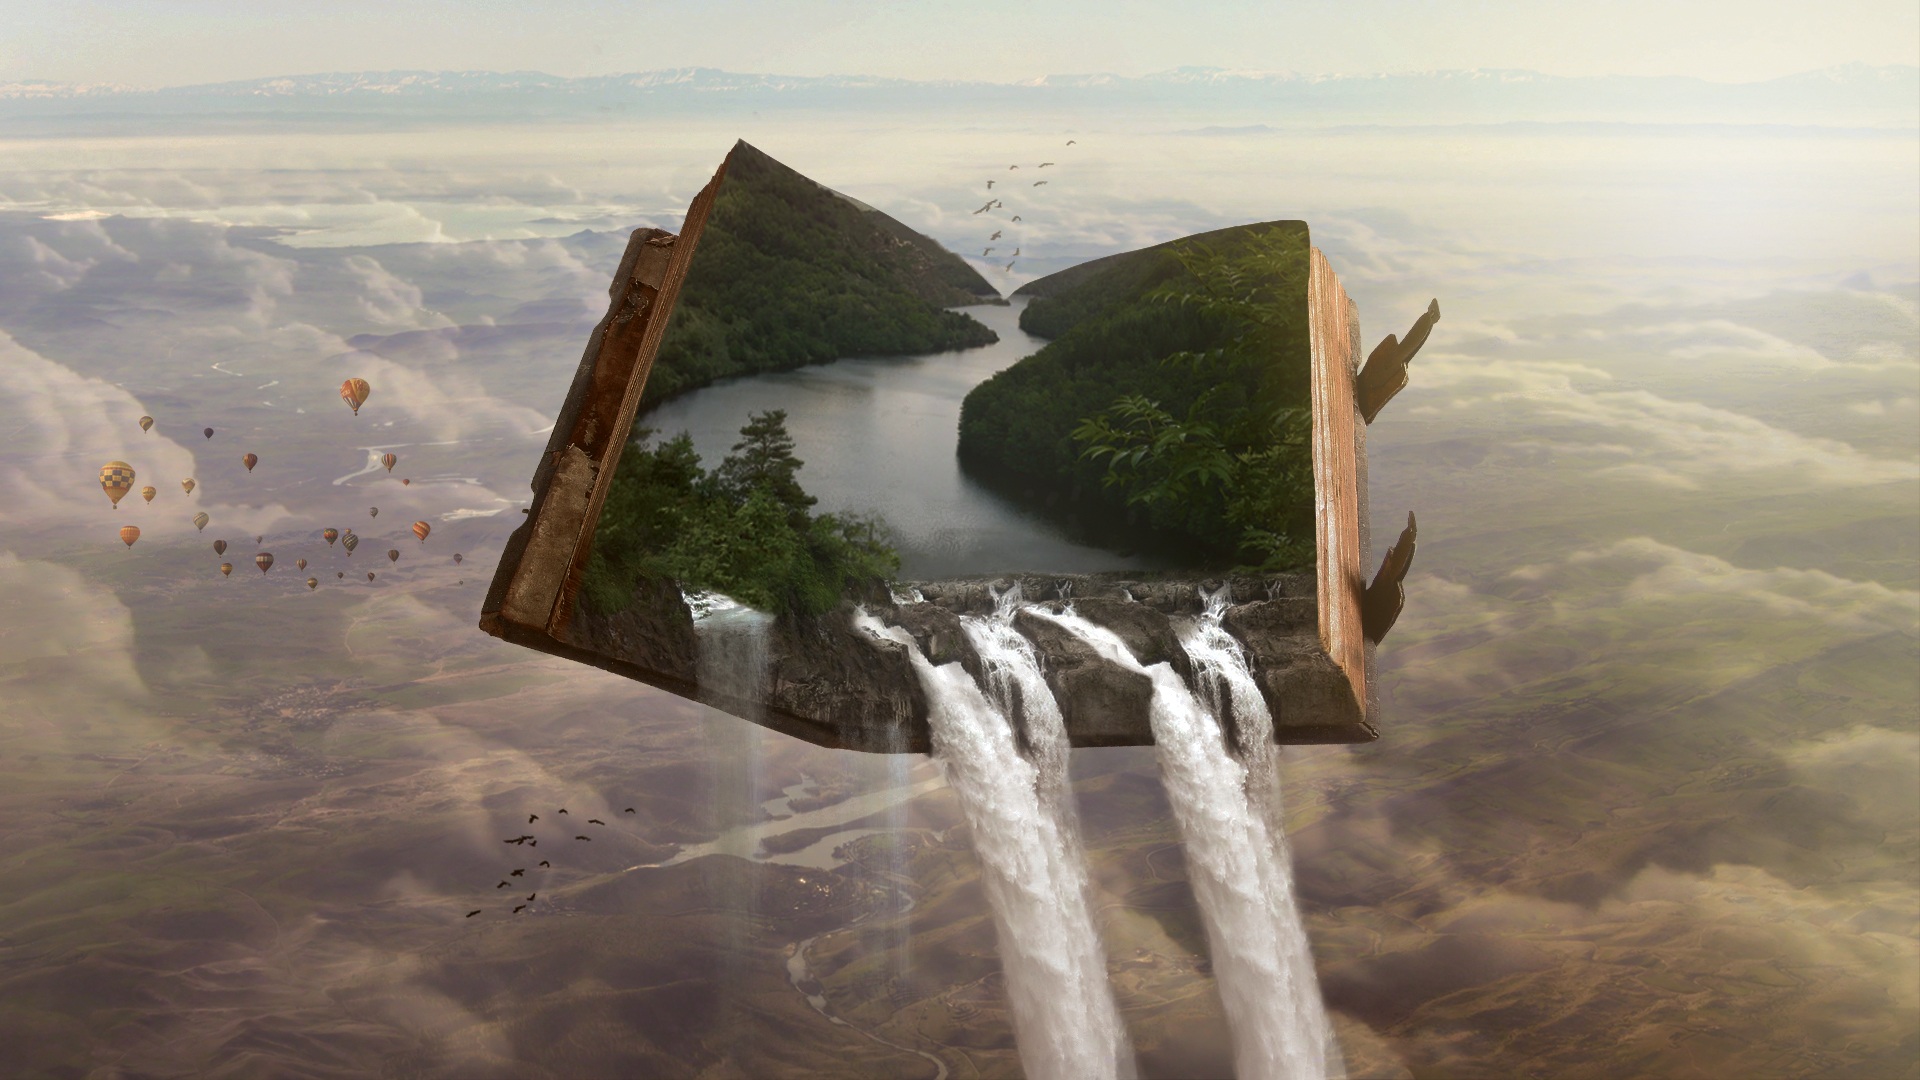 General 1920x1080 nature waterfall books hot air balloons landscape river forest photoshopped